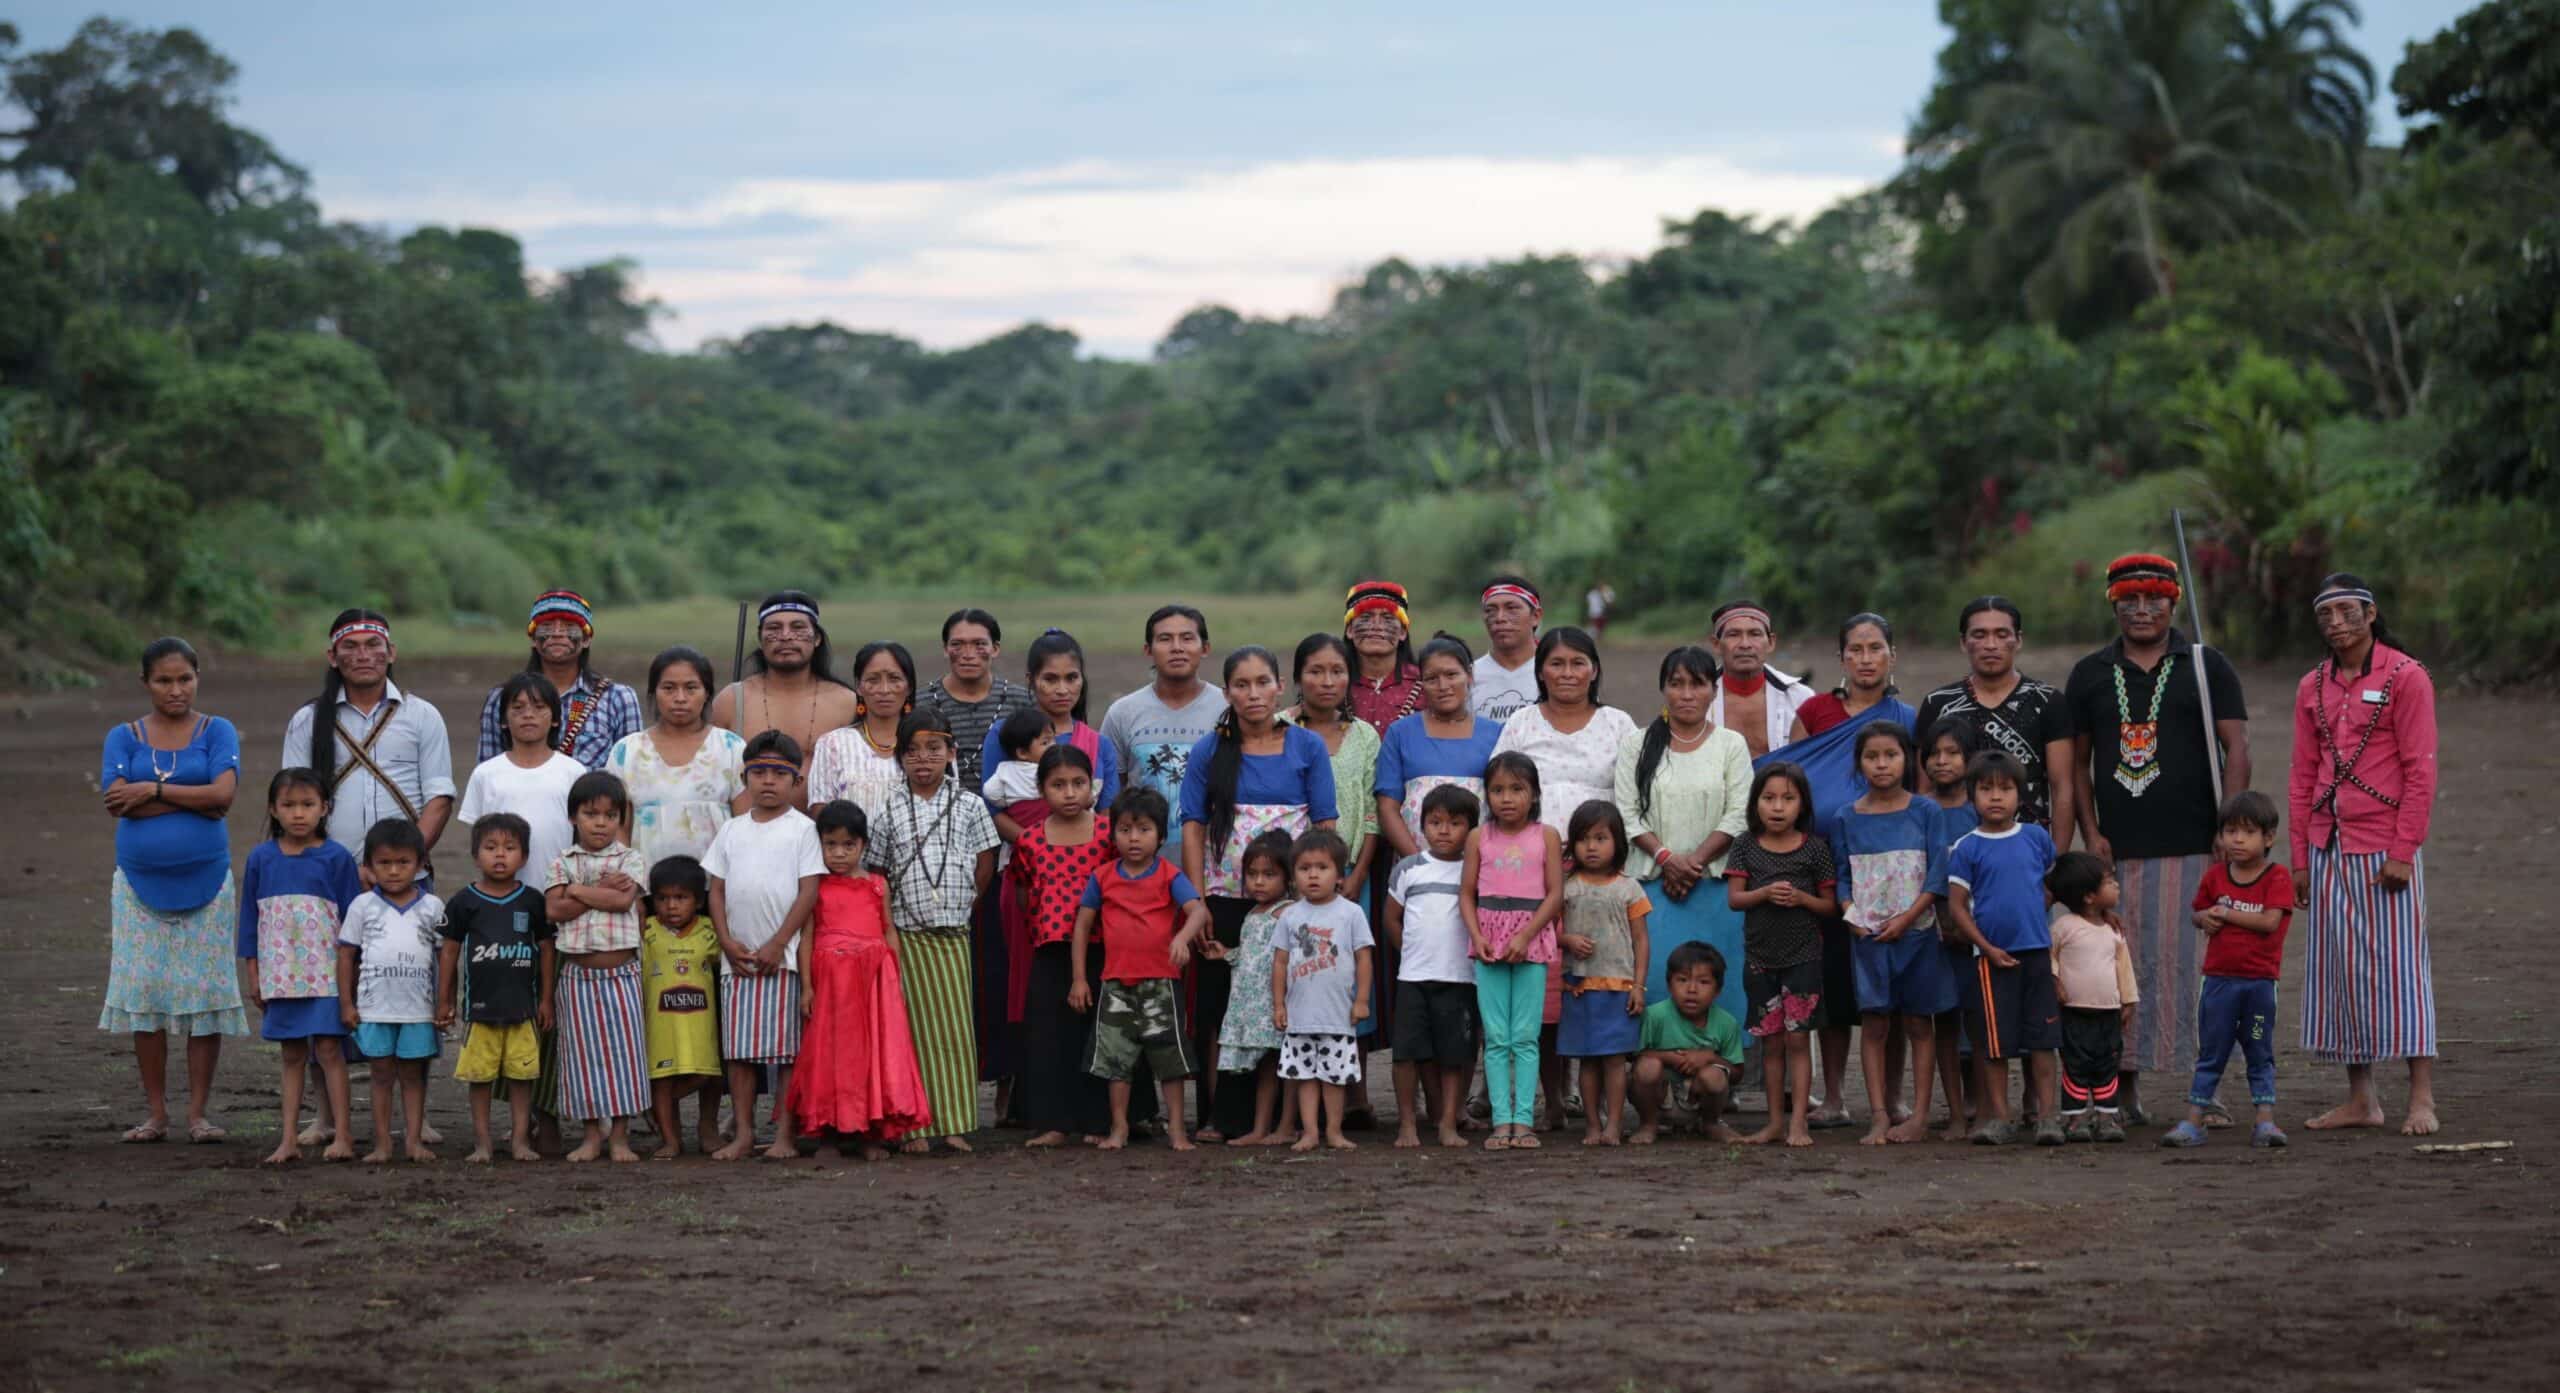 Tribal Quest Ecuador: MyHeritage Documents the Family Histories of the Achuar Tribe